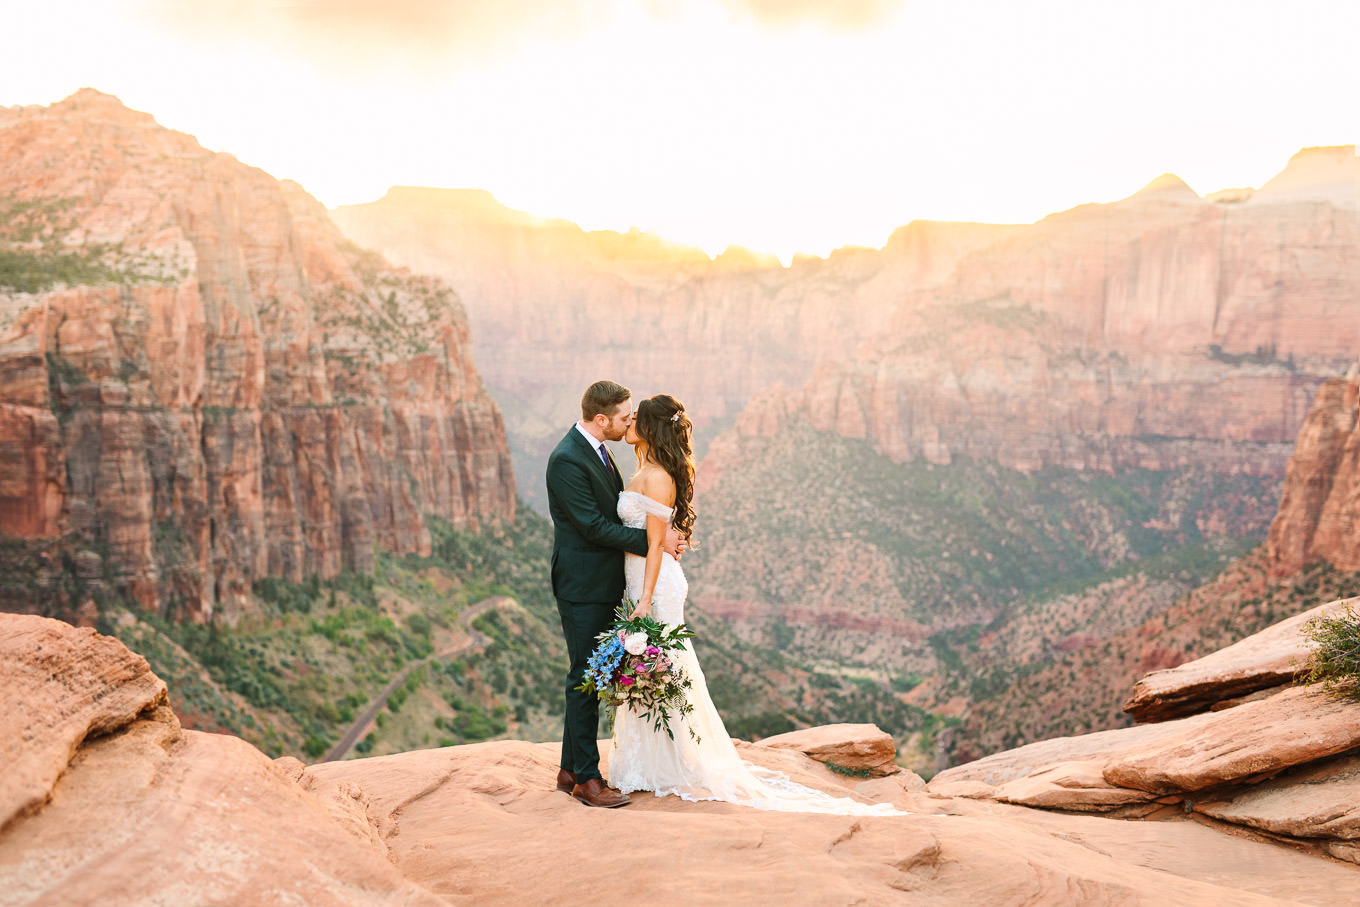 Bride and groom on cliff | Zion National Park sunset elopement scenic overlook | Colorful adventure elopement photography | #utahelopement #zionelopement #zionwedding #undercanvaszion   Source: Mary Costa Photography | Los Angeles